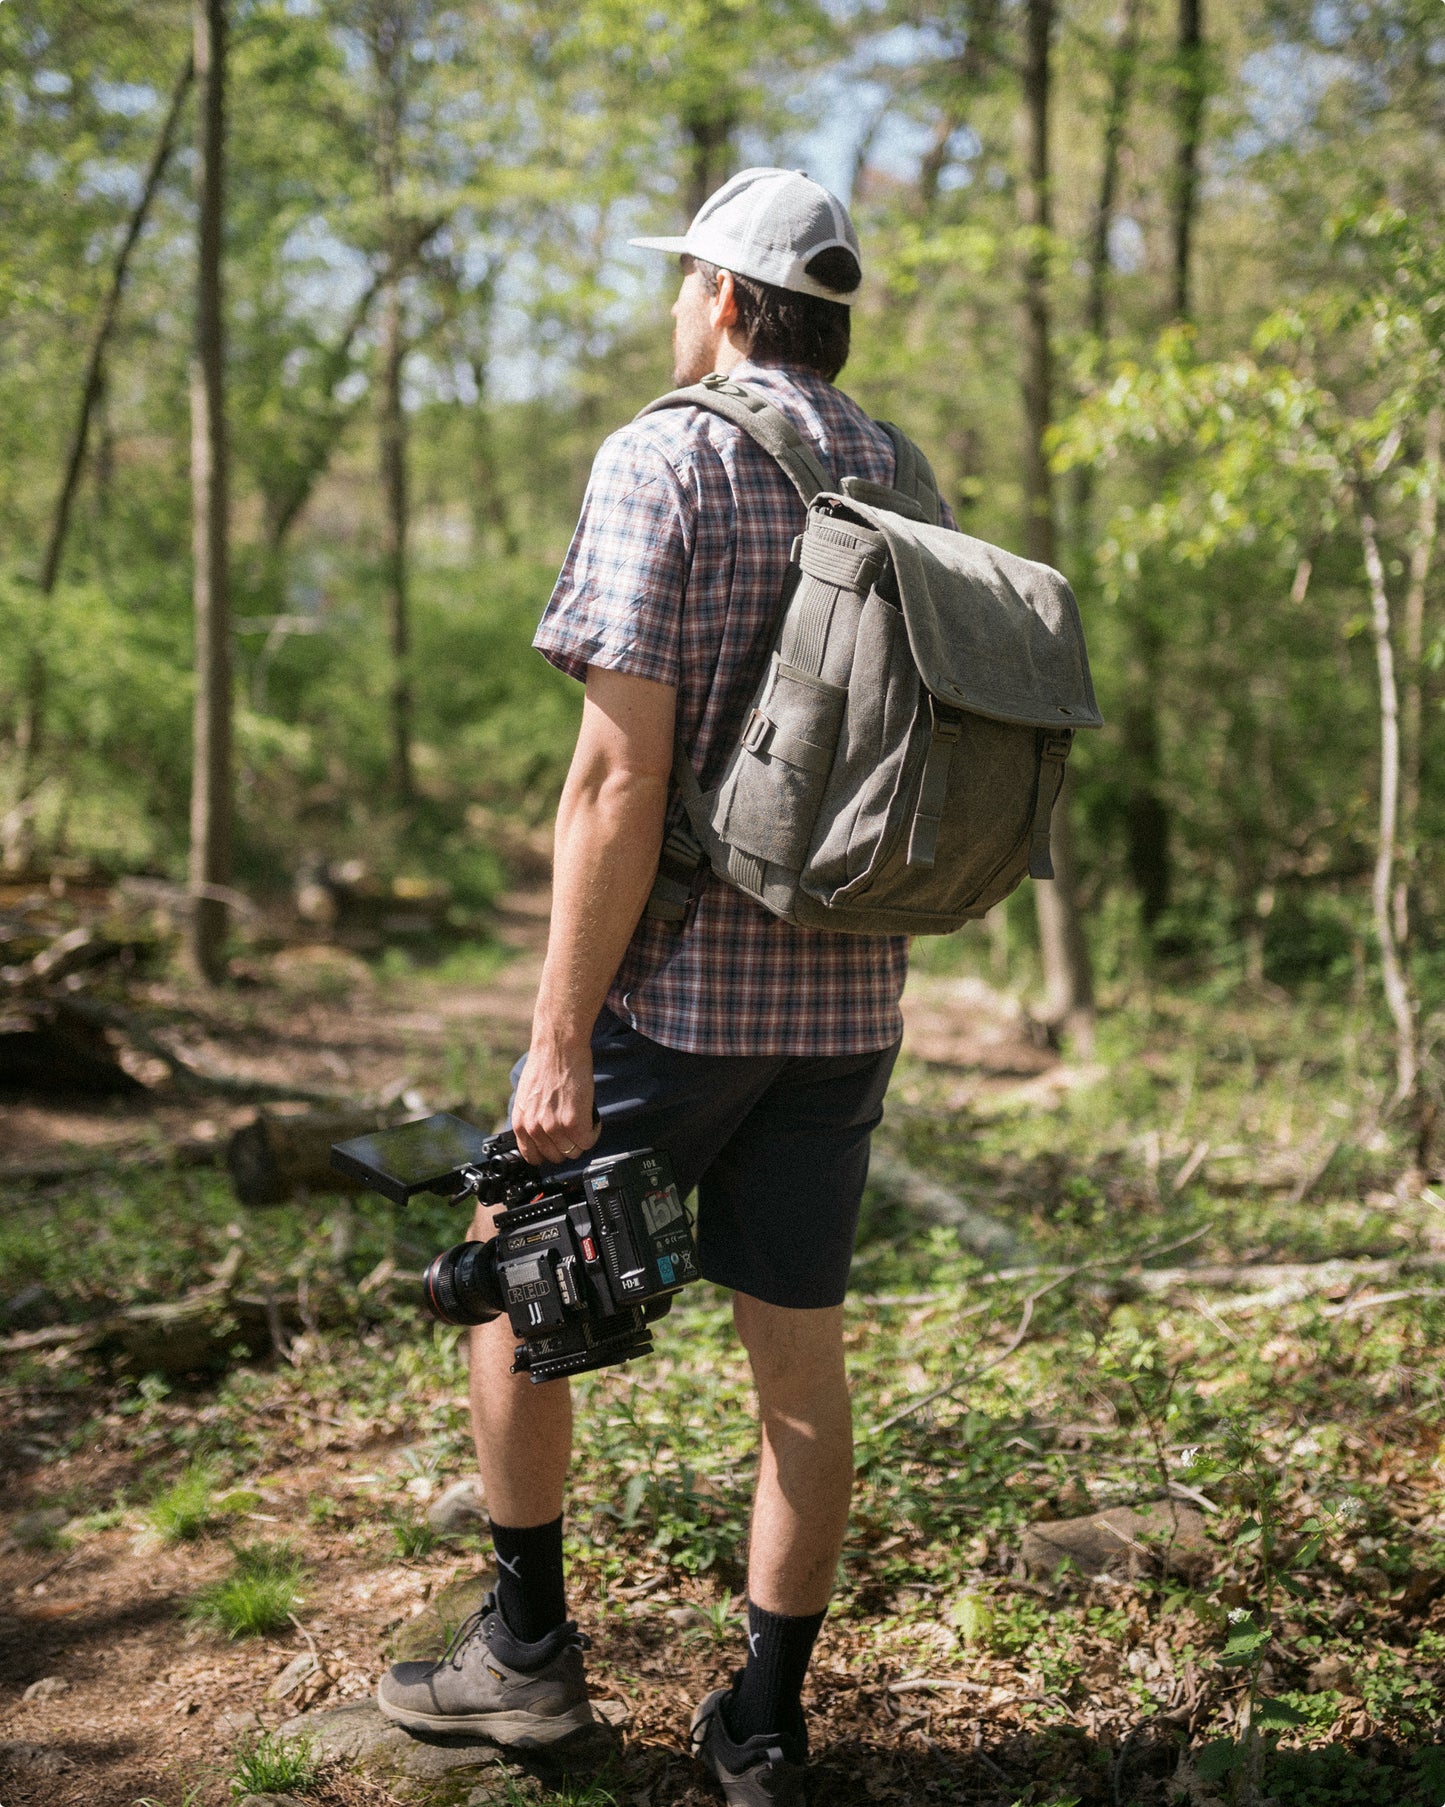 A man holding a filming equipment and wearing a backpack, gazing into the forest 